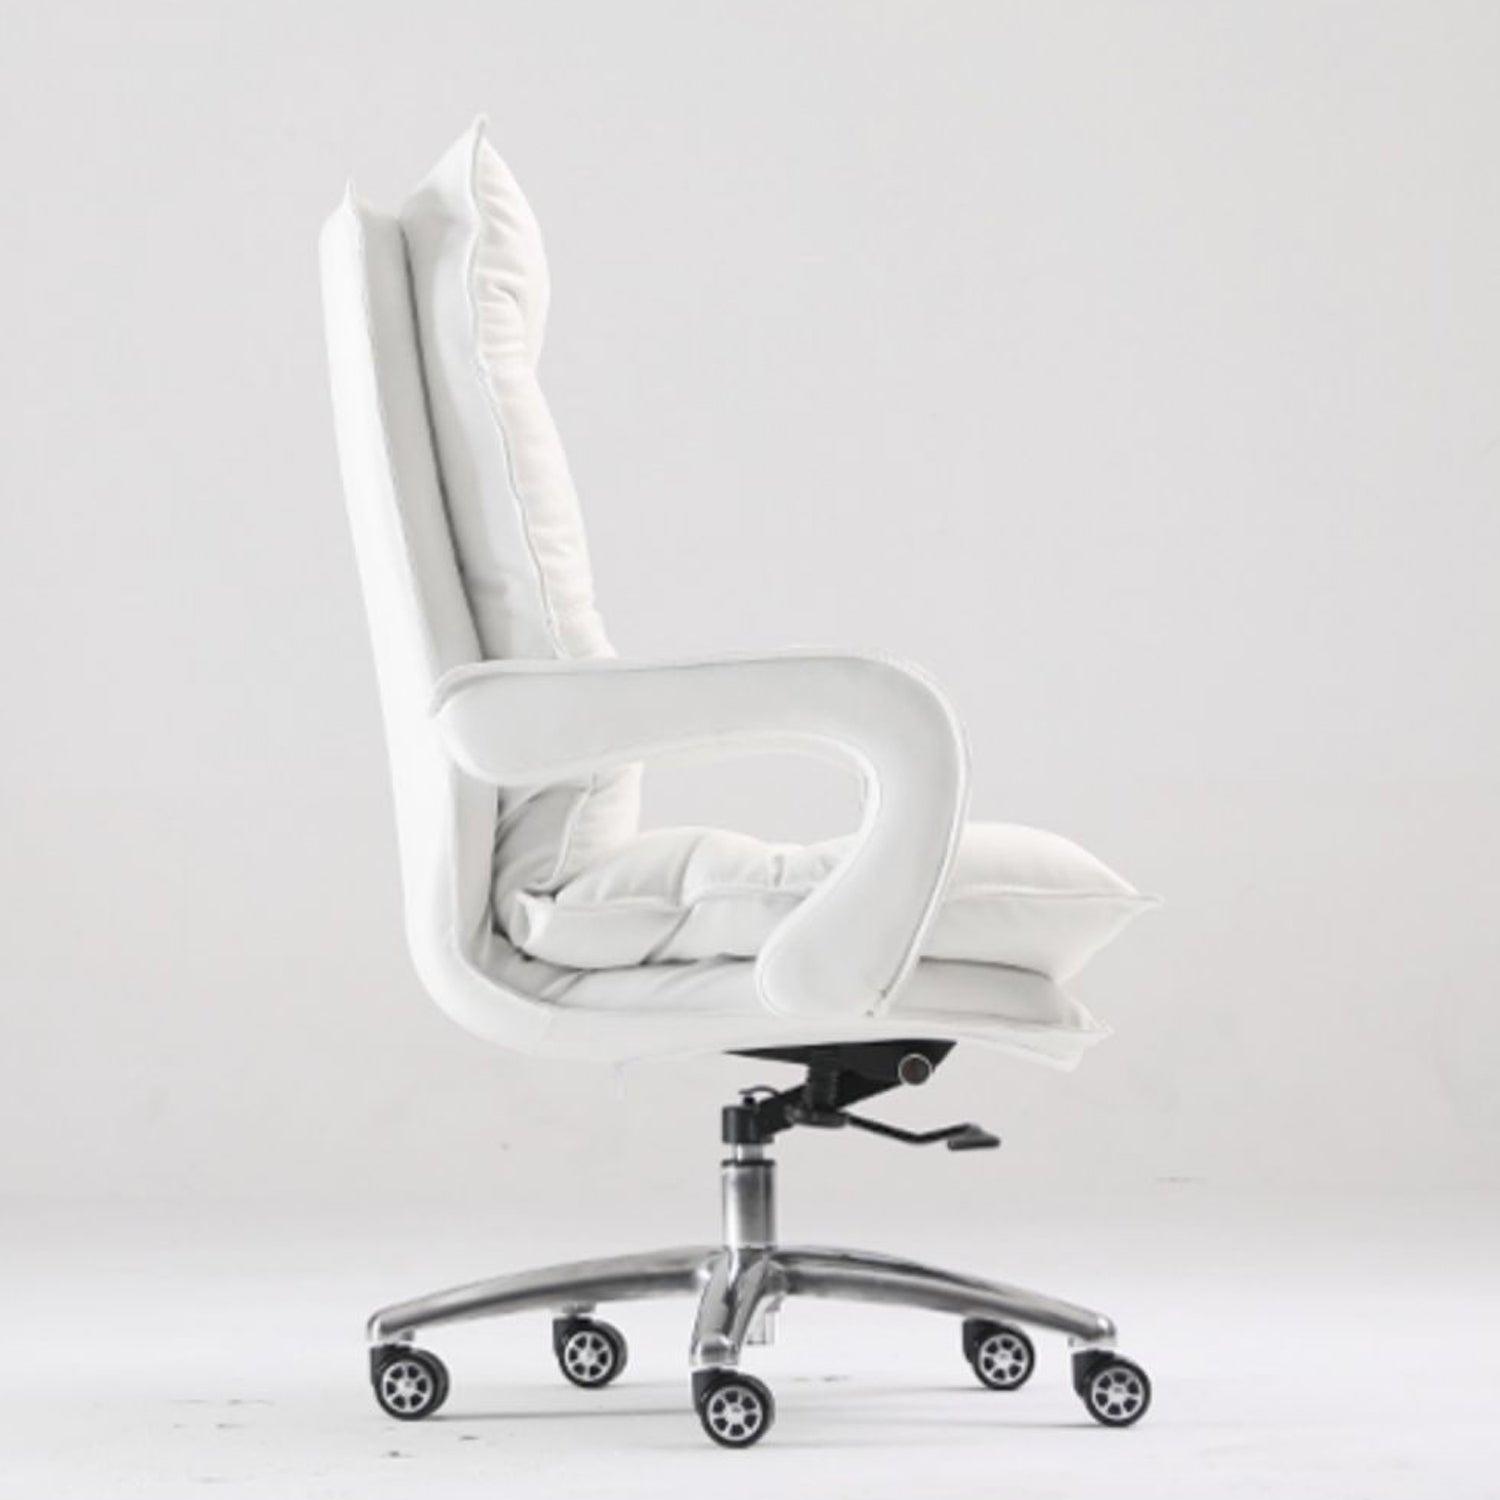 Silver Aluminium Modern Desk Chair with High Back Conference Chair